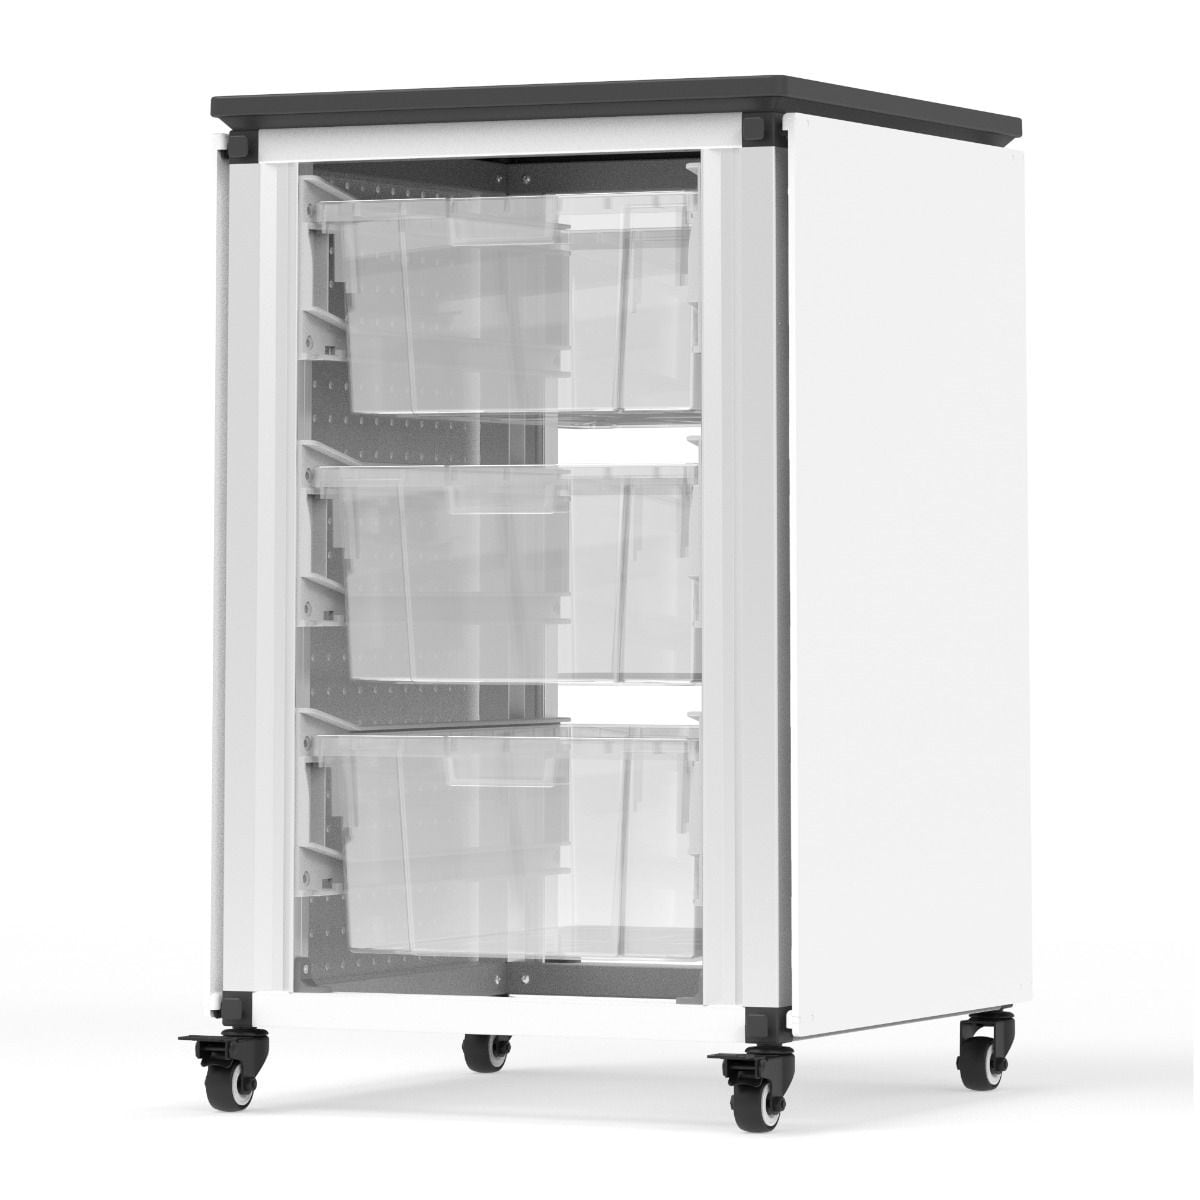 https://ak1.ostkcdn.com/images/products/is/images/direct/b7ccf24a2976bcd099d7737aab9c09c0b2b6b525/Luxor-Modular-Classroom-Storage-Cabinet---Single-Cabinet-with-3-Large-Bins.jpg